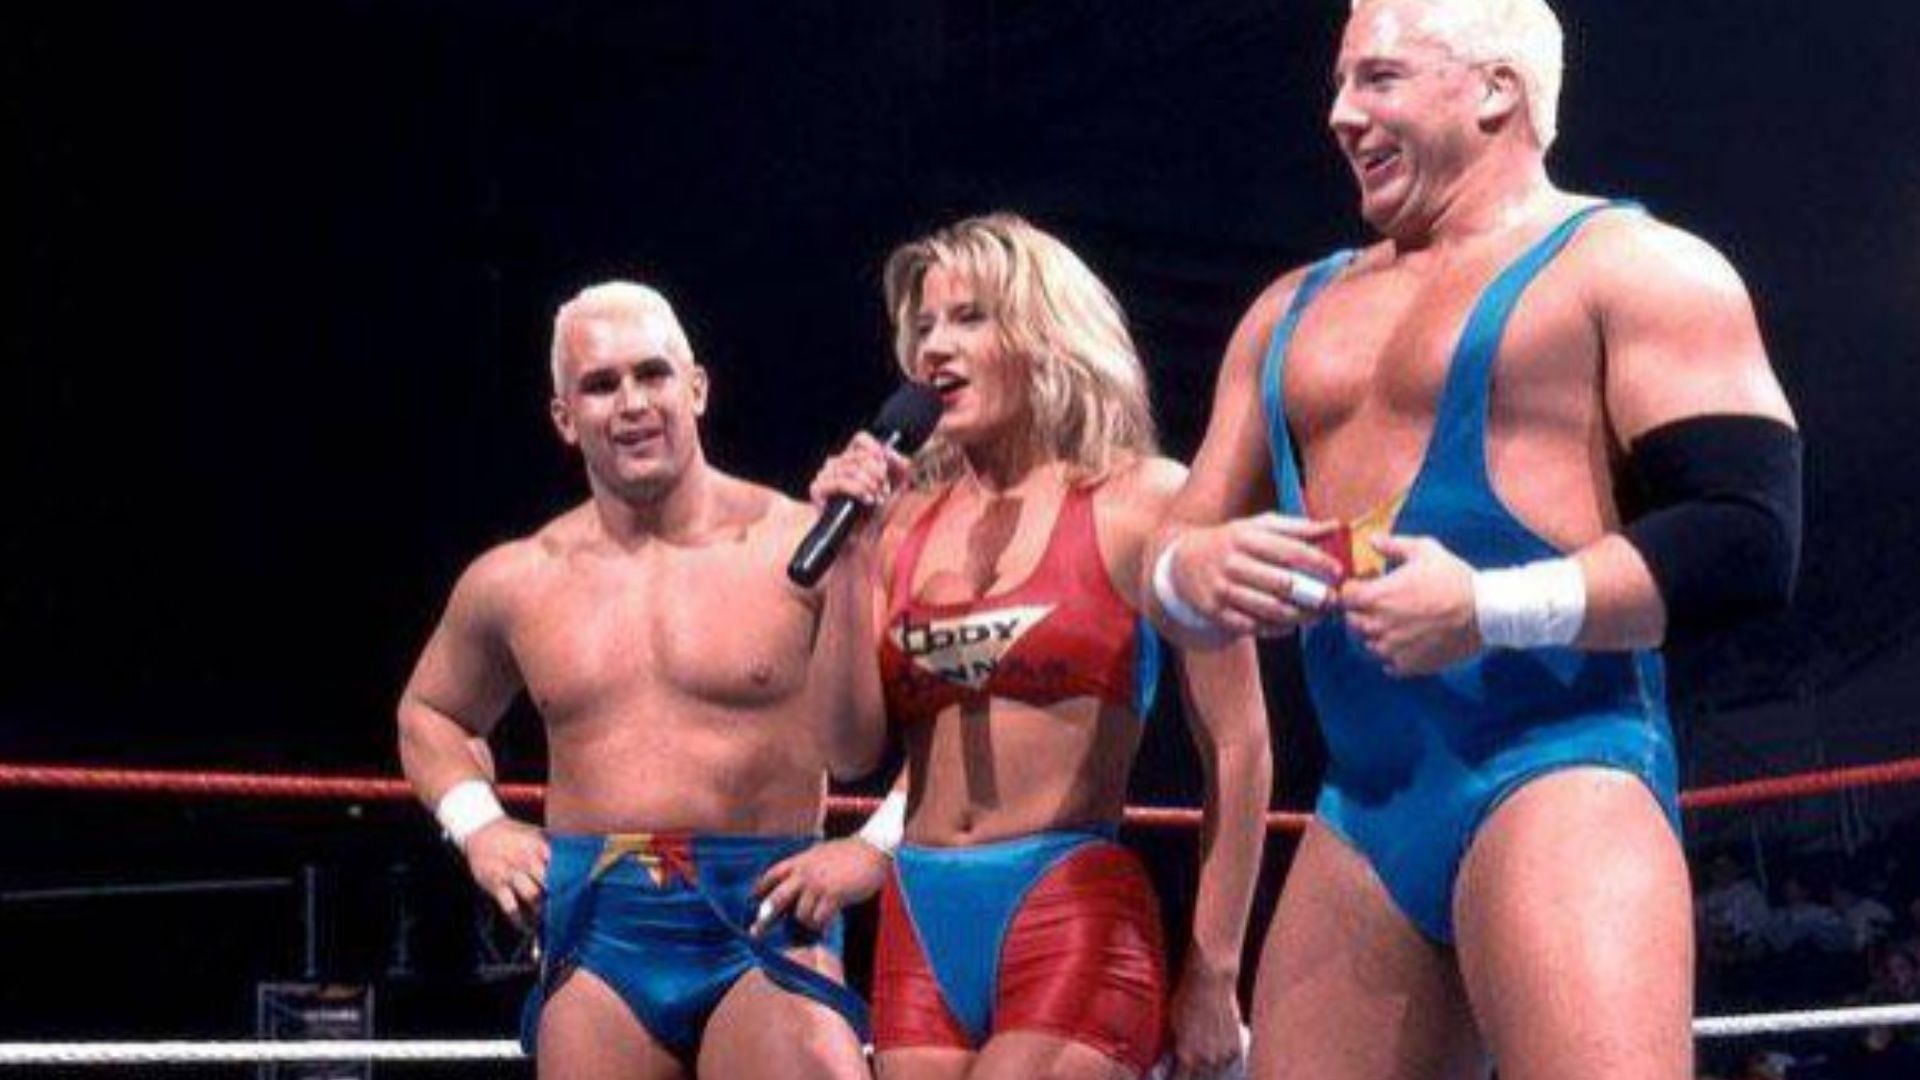 The Bodydonnas was the name of stable of Chris Candido, Dr. Tom Prichard and Sunny.